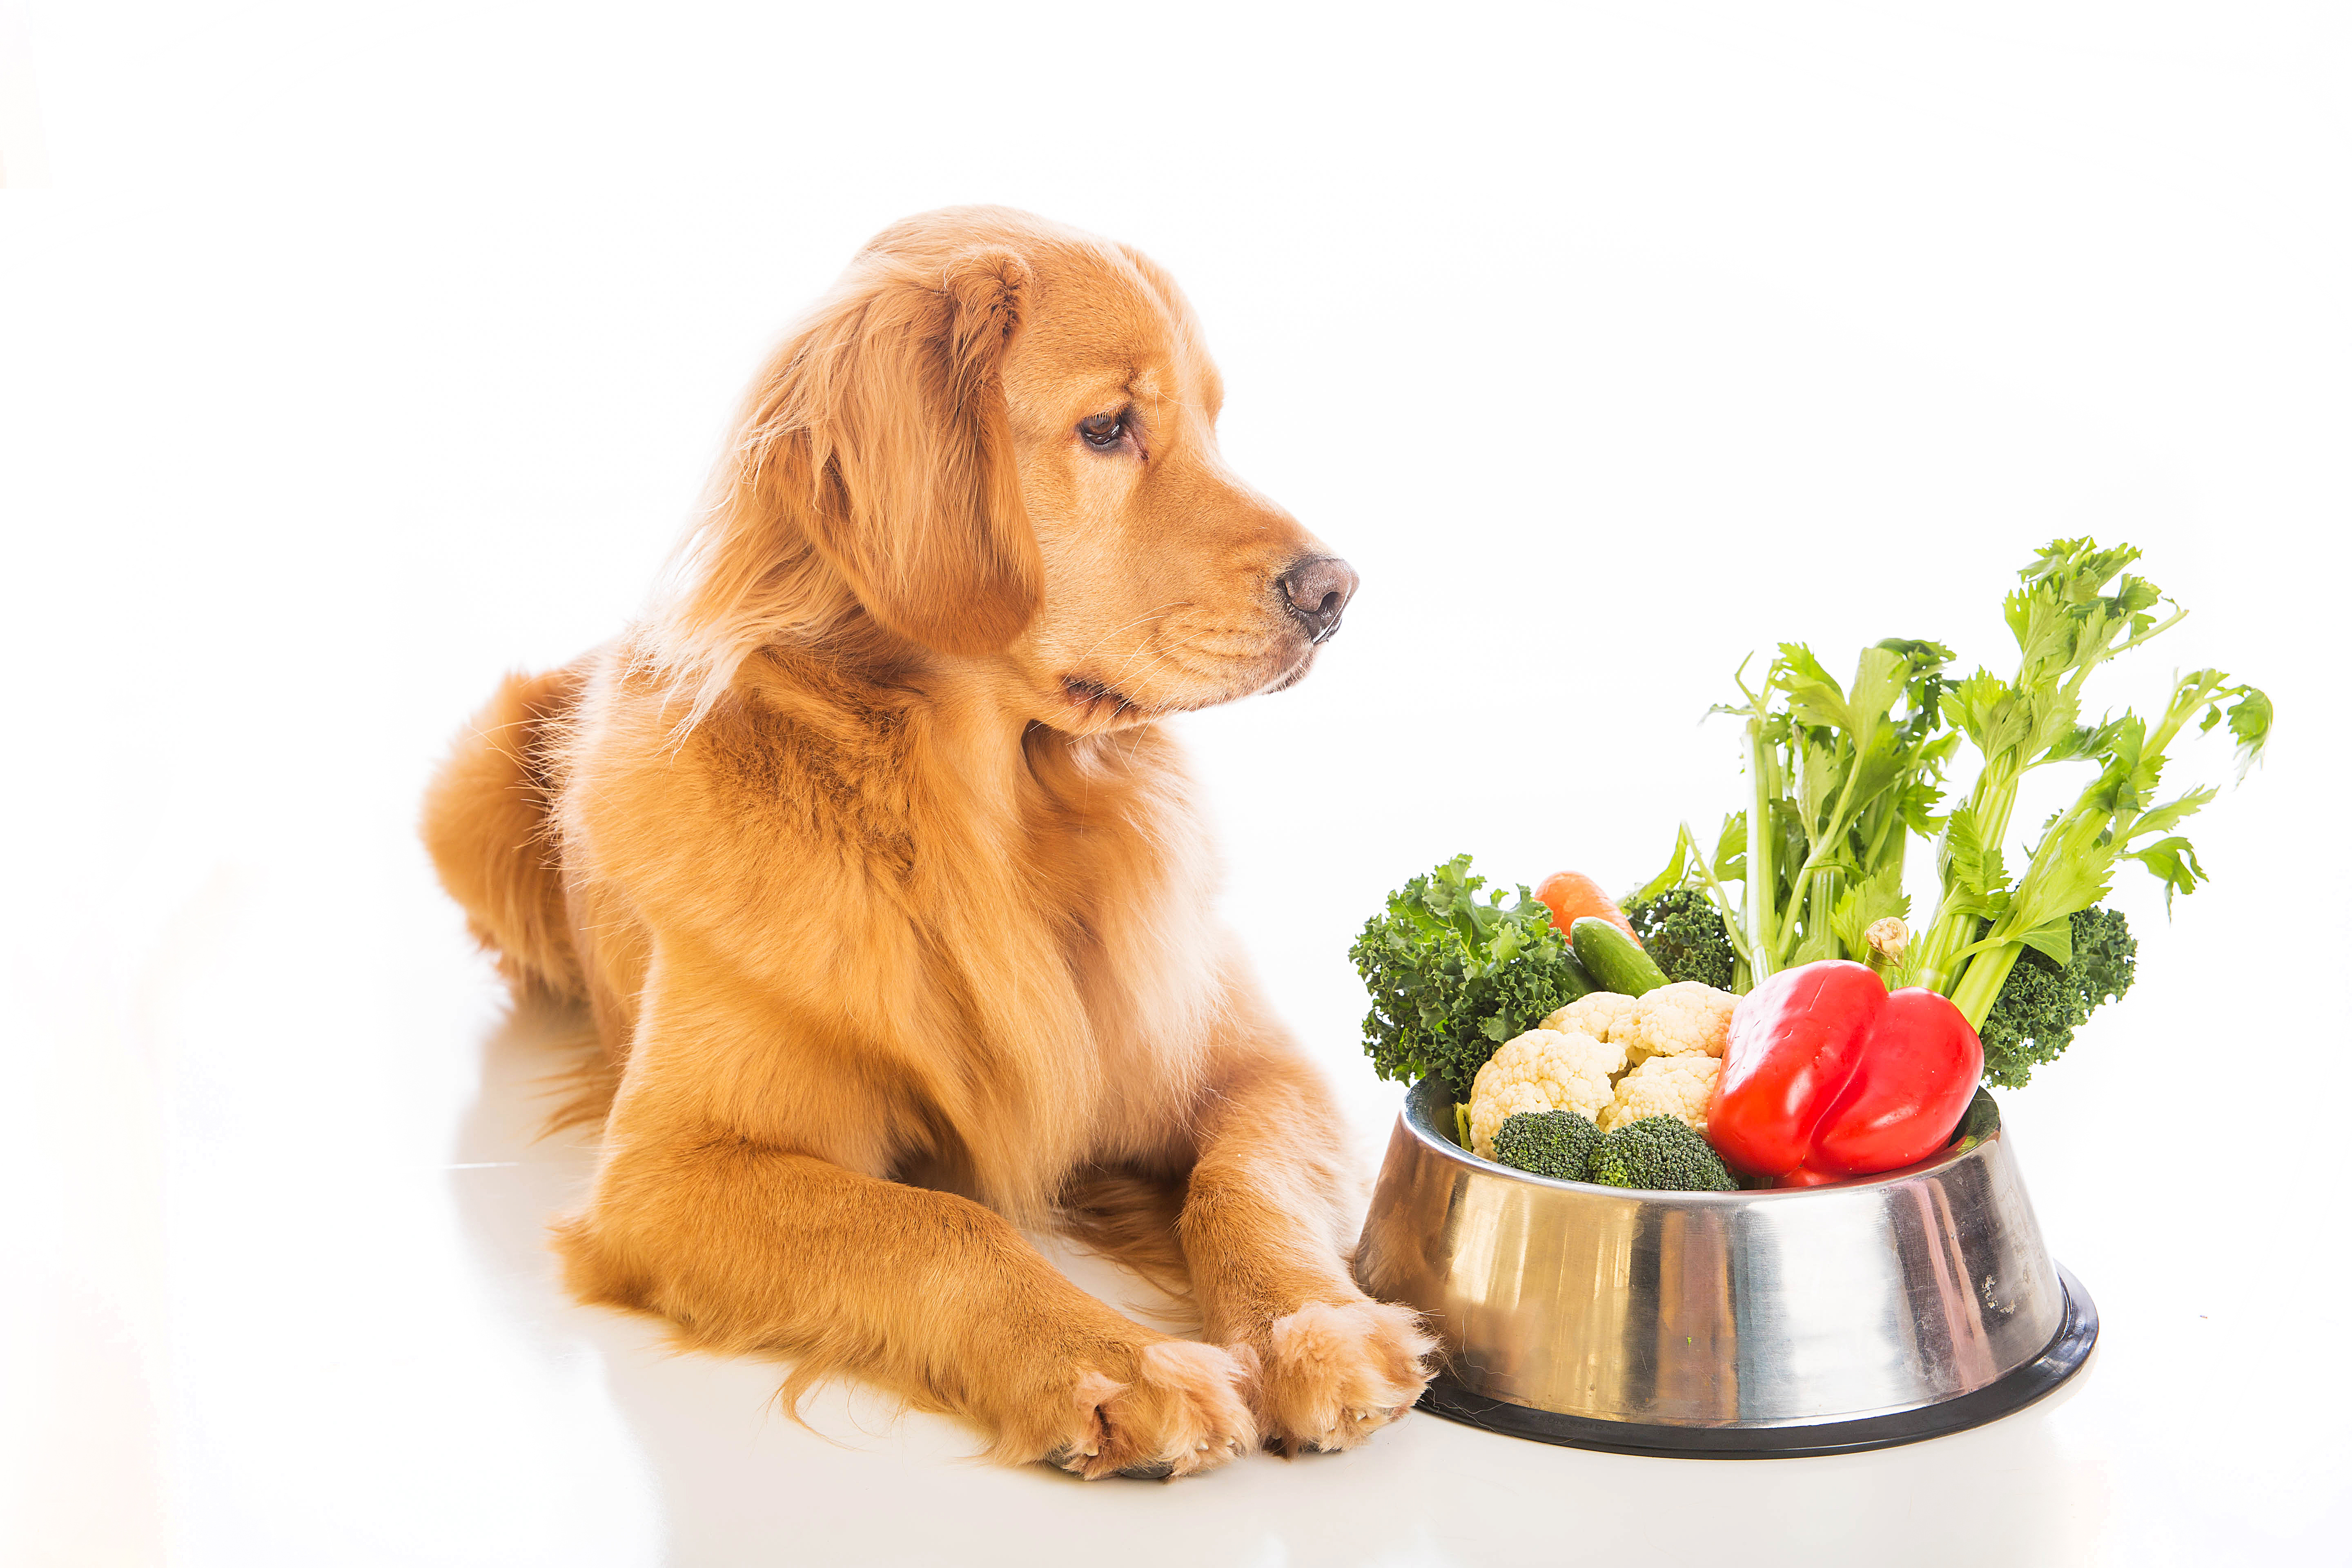 New Year’s Dog Diet Resolution: “I resolve that my dog will eat better in the new year!”   Linda Michaels, M.A., — Del Mar Dog Training